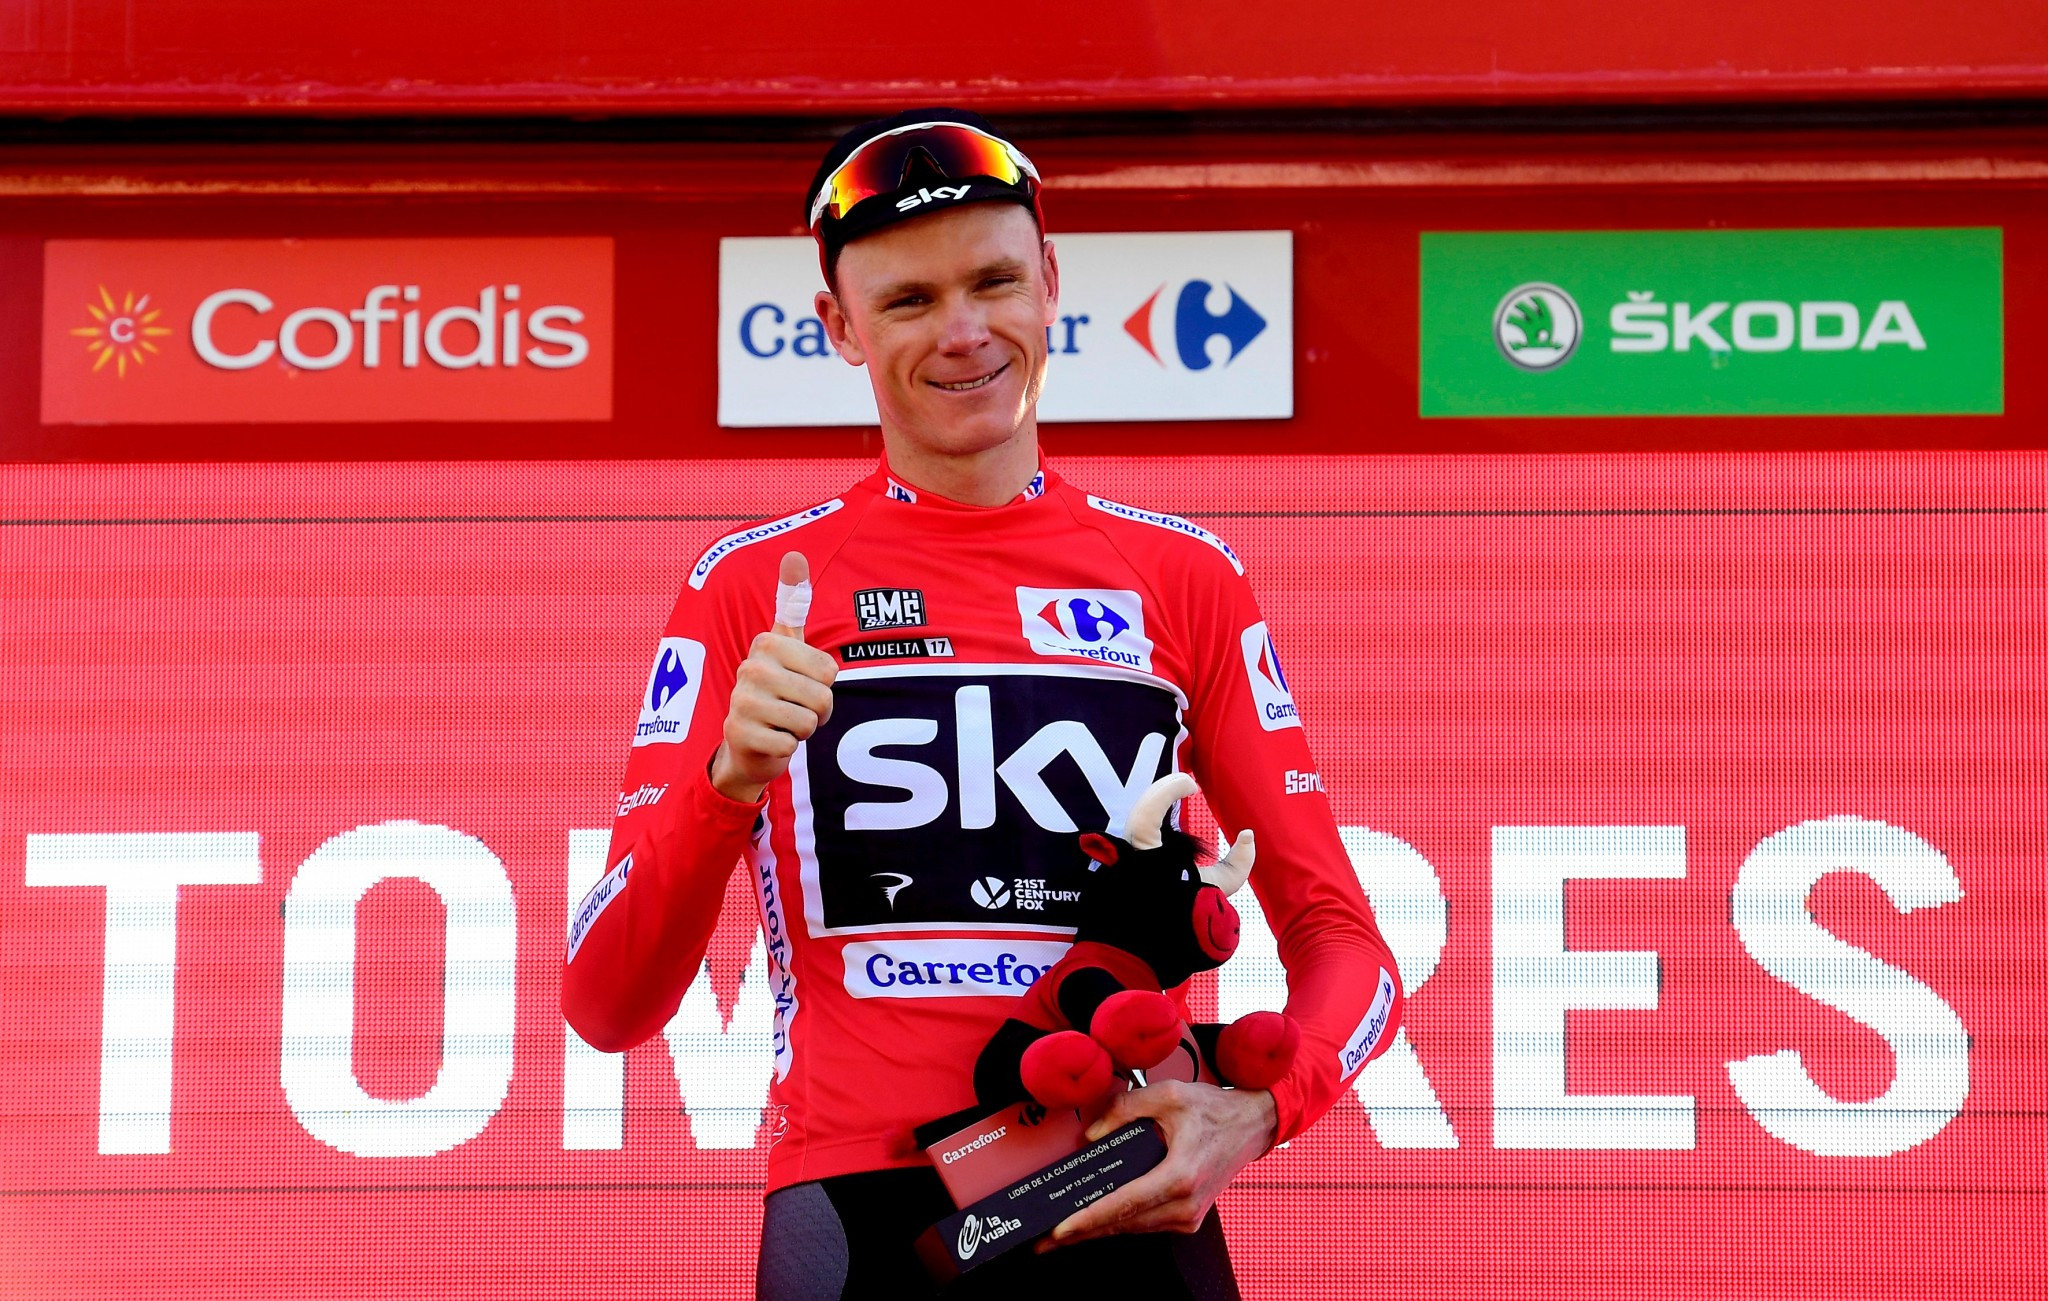 Great Britain's Chris Froome retained his lead in the overall standings ©Getty Images